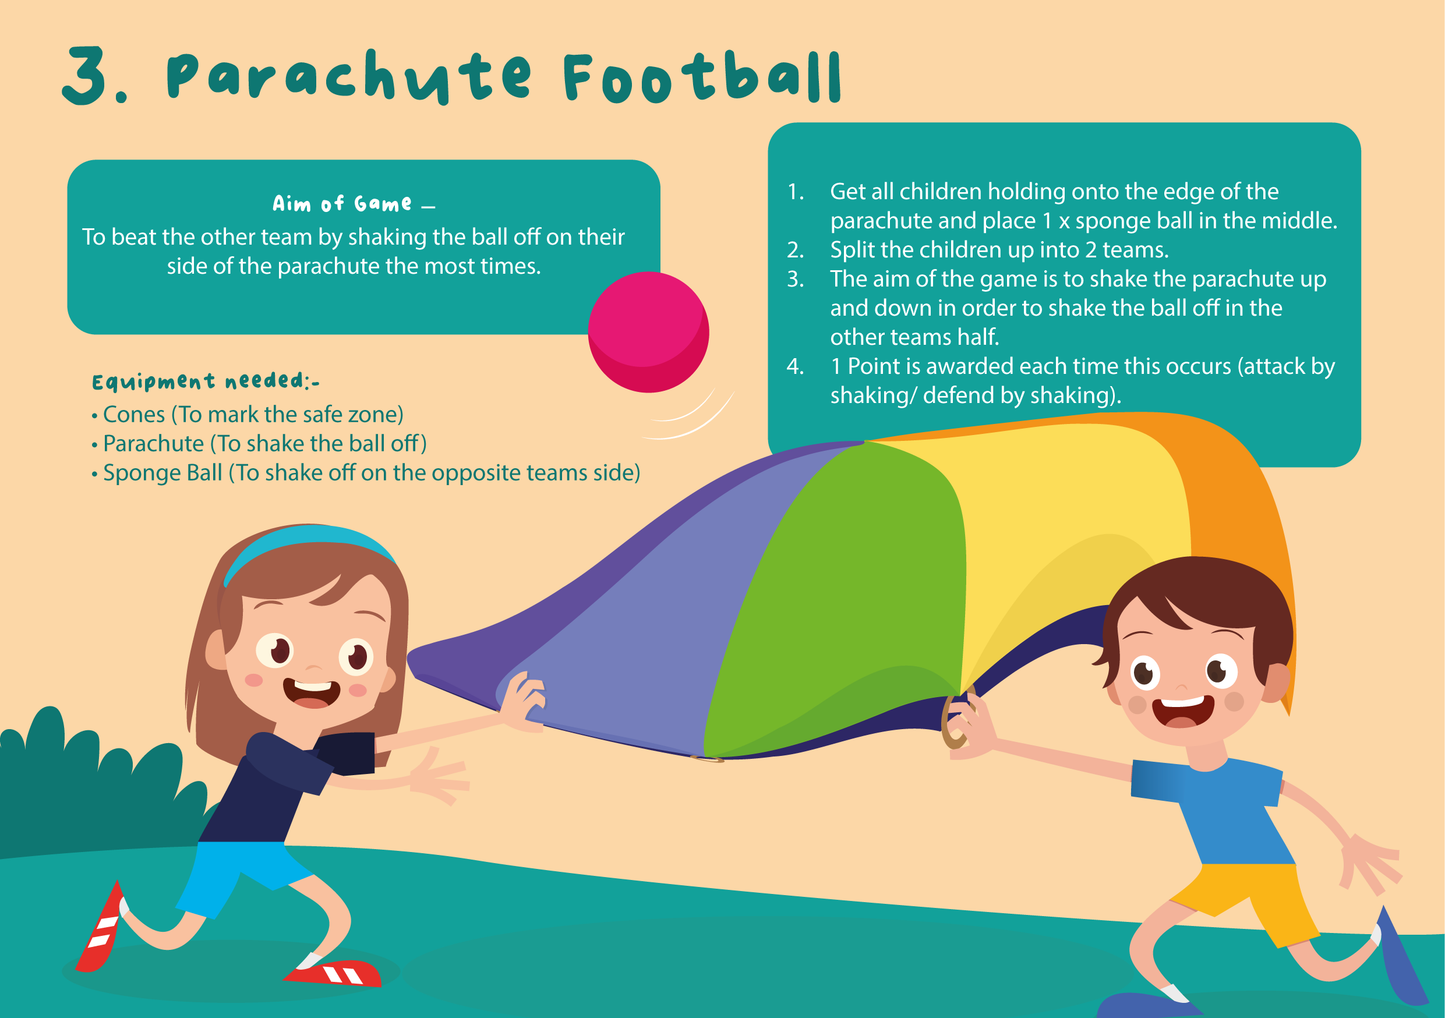 Game rules for Parachute Football in Nurseries and Primary Schools